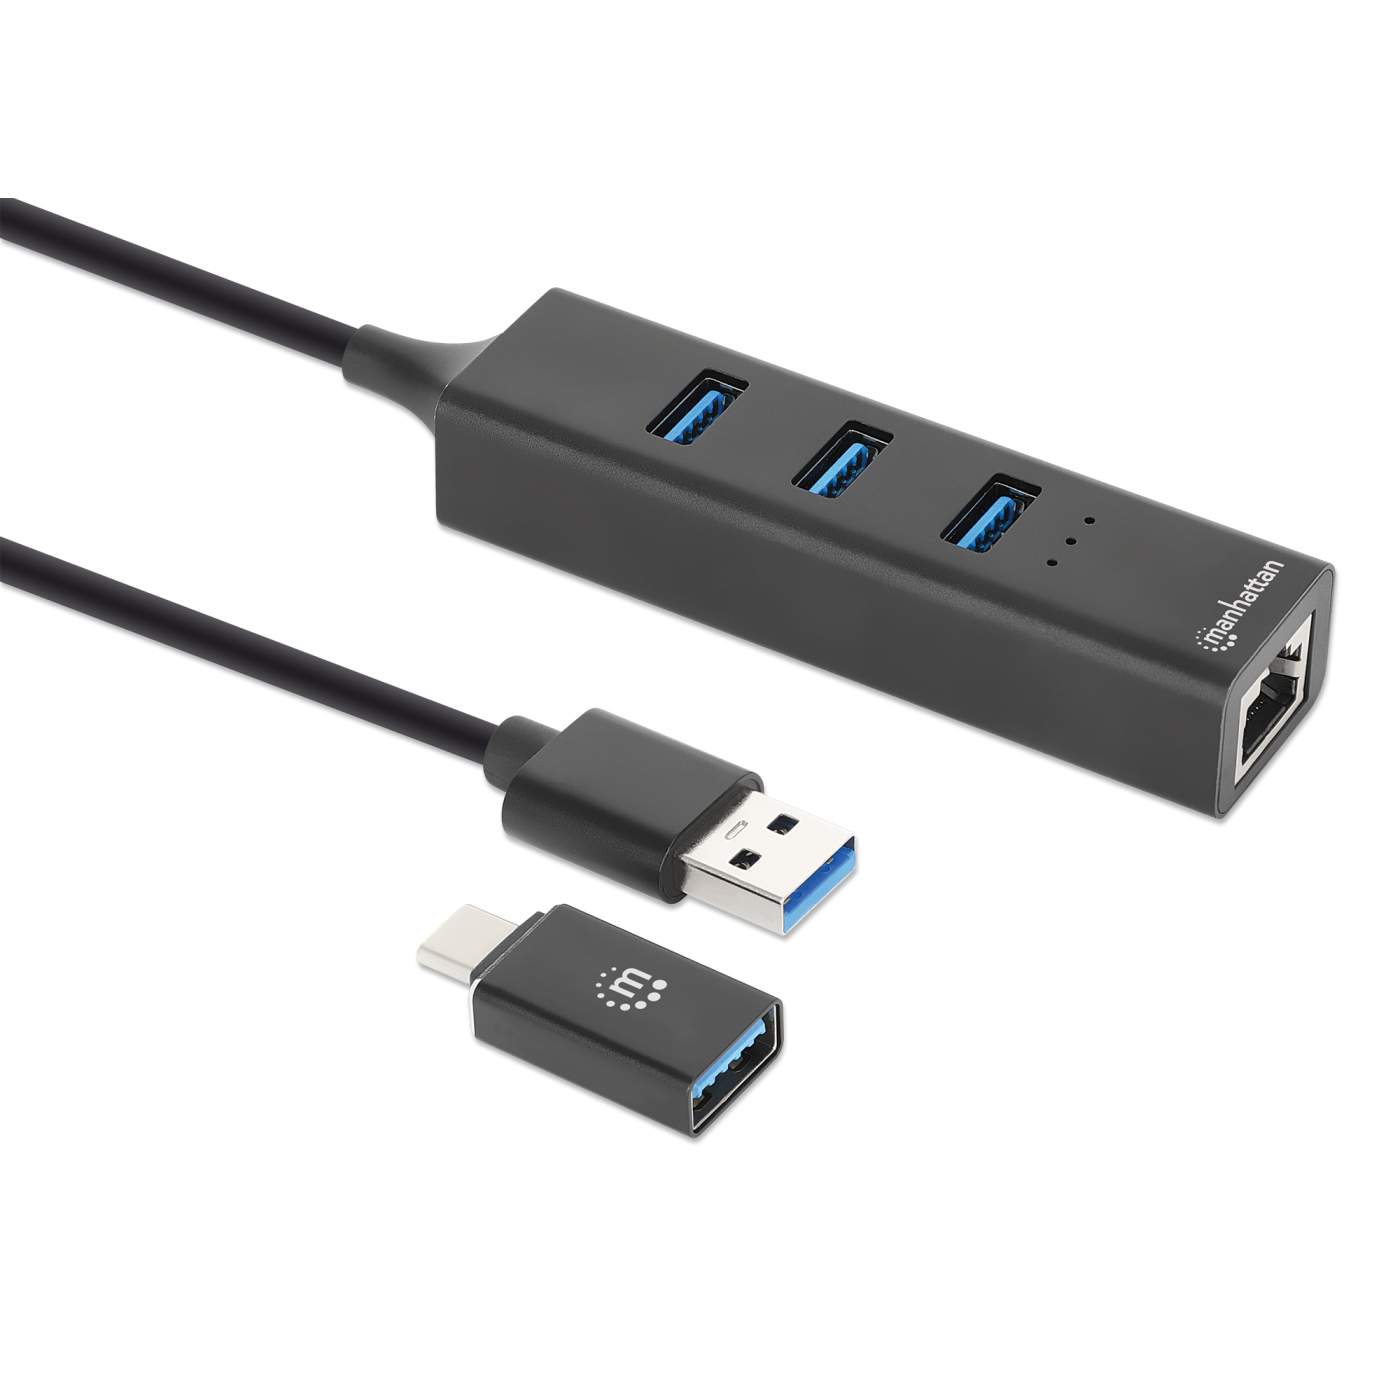 https://manhattanproducts.us/cdn/shop/products/3-port-usb-30-type-ca-combo-hub-with-gigabit-ethernet-network-adapter-180894-2_b3a3af16-fe5c-477e-ae72-d3b1069358bd.jpg?v=1692864384&width=1400